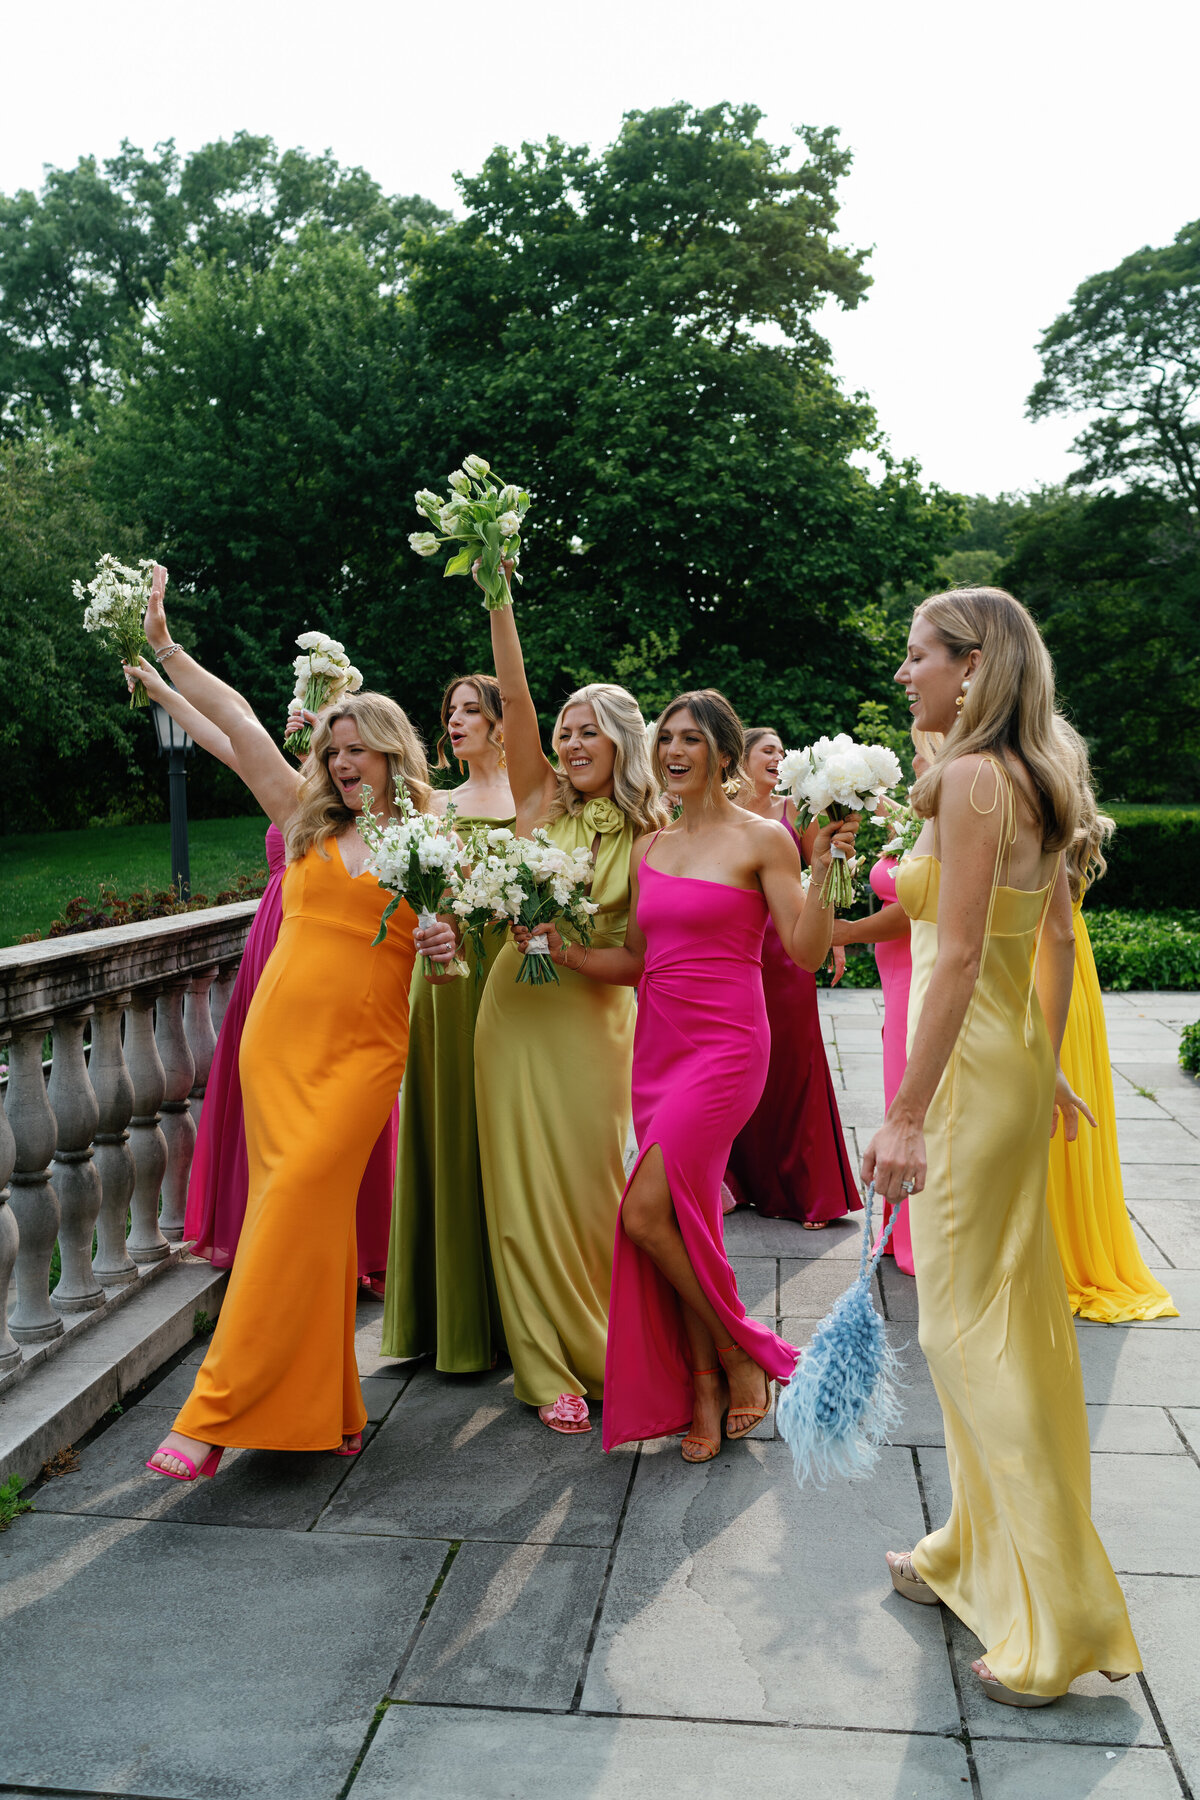 dainty-colorful-wedding-party-gowns-organic-bouquet-sarah-brehant-events